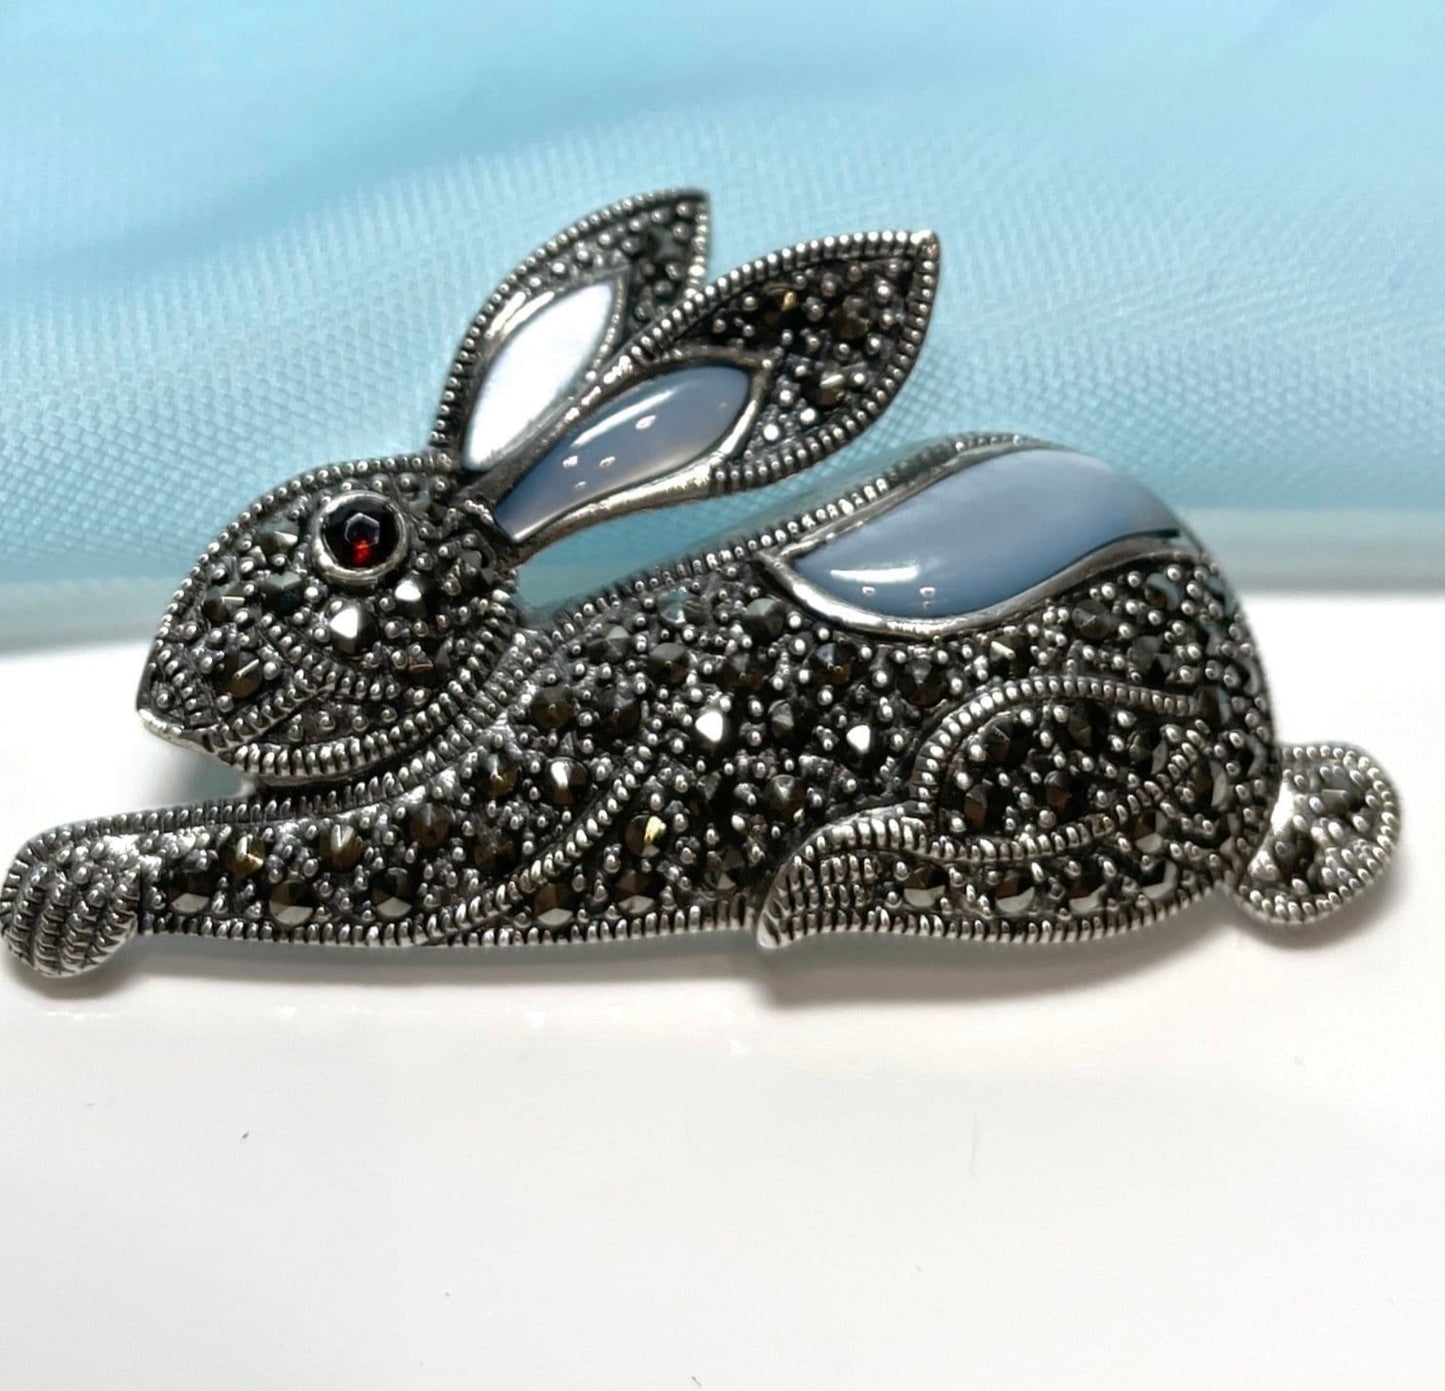 Rabbit hare brooch marcasite sterling silver garnet and mother of pearl